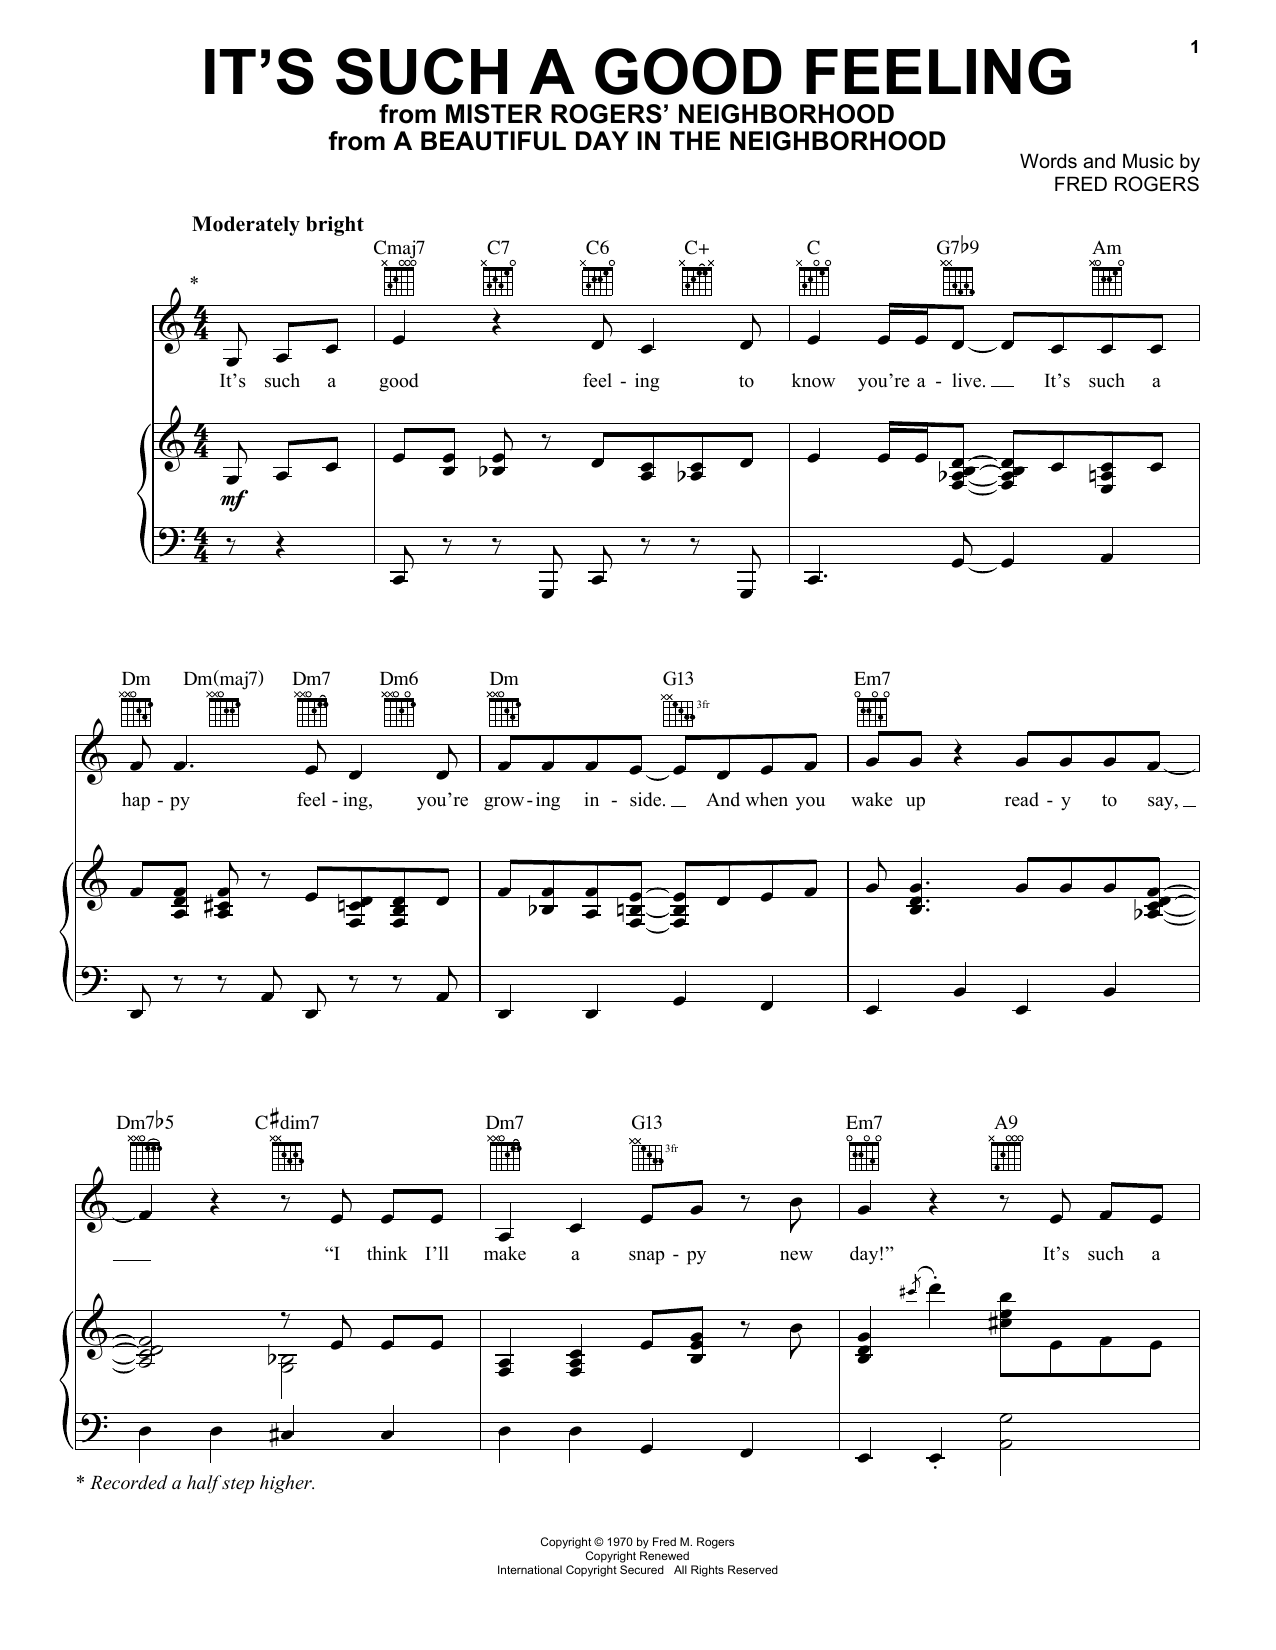 It's Such A Good Feeling (from A Beautiful Day in the Neighborhood) sheet music